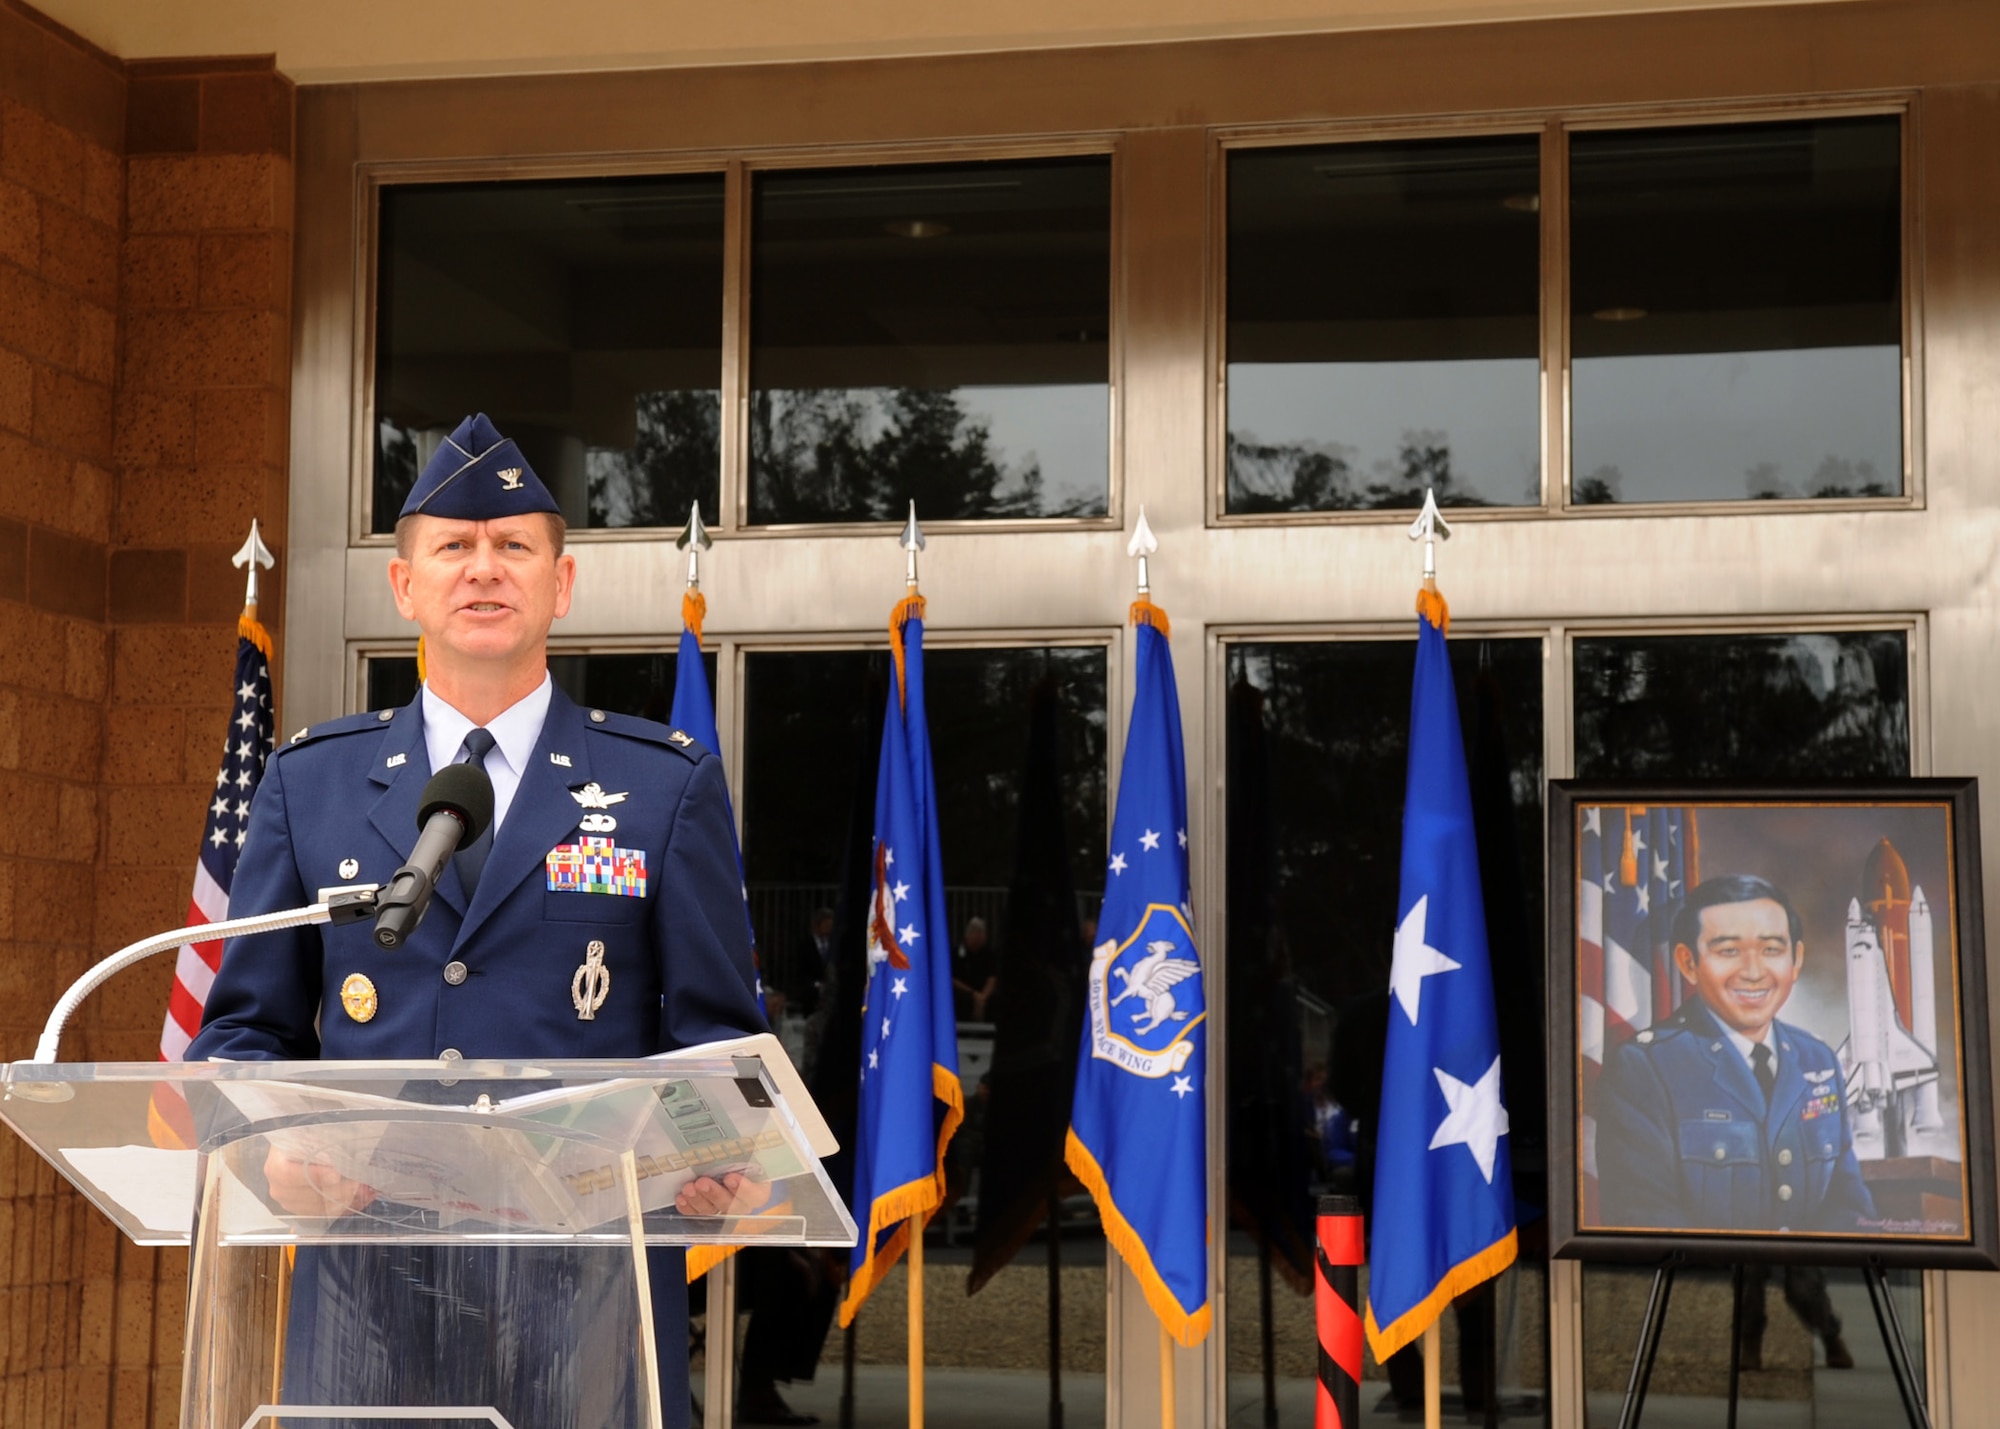 VANDENBERG AFB, Calif.-- Col. Wayne Monteith, the 50th Space Wing commander, delivers a speech during the dedication ceremony of the new Ellison Onizuka Satellite Operations Facility here Friday, July 30, 2010. Onizuka Air Force Station, previously located in Sunnyvale, officially closed July 28. The 21st Space Operations Squadron transferred here as part of an effort to consolidate satellite command and control operations while reducing excess infrastructure. Onizuka AFS was selected for closure by the Base Closure and Realignment Commission in 2005 (U.S. Air Force Photo/Senior Airman Bryan Boyette)